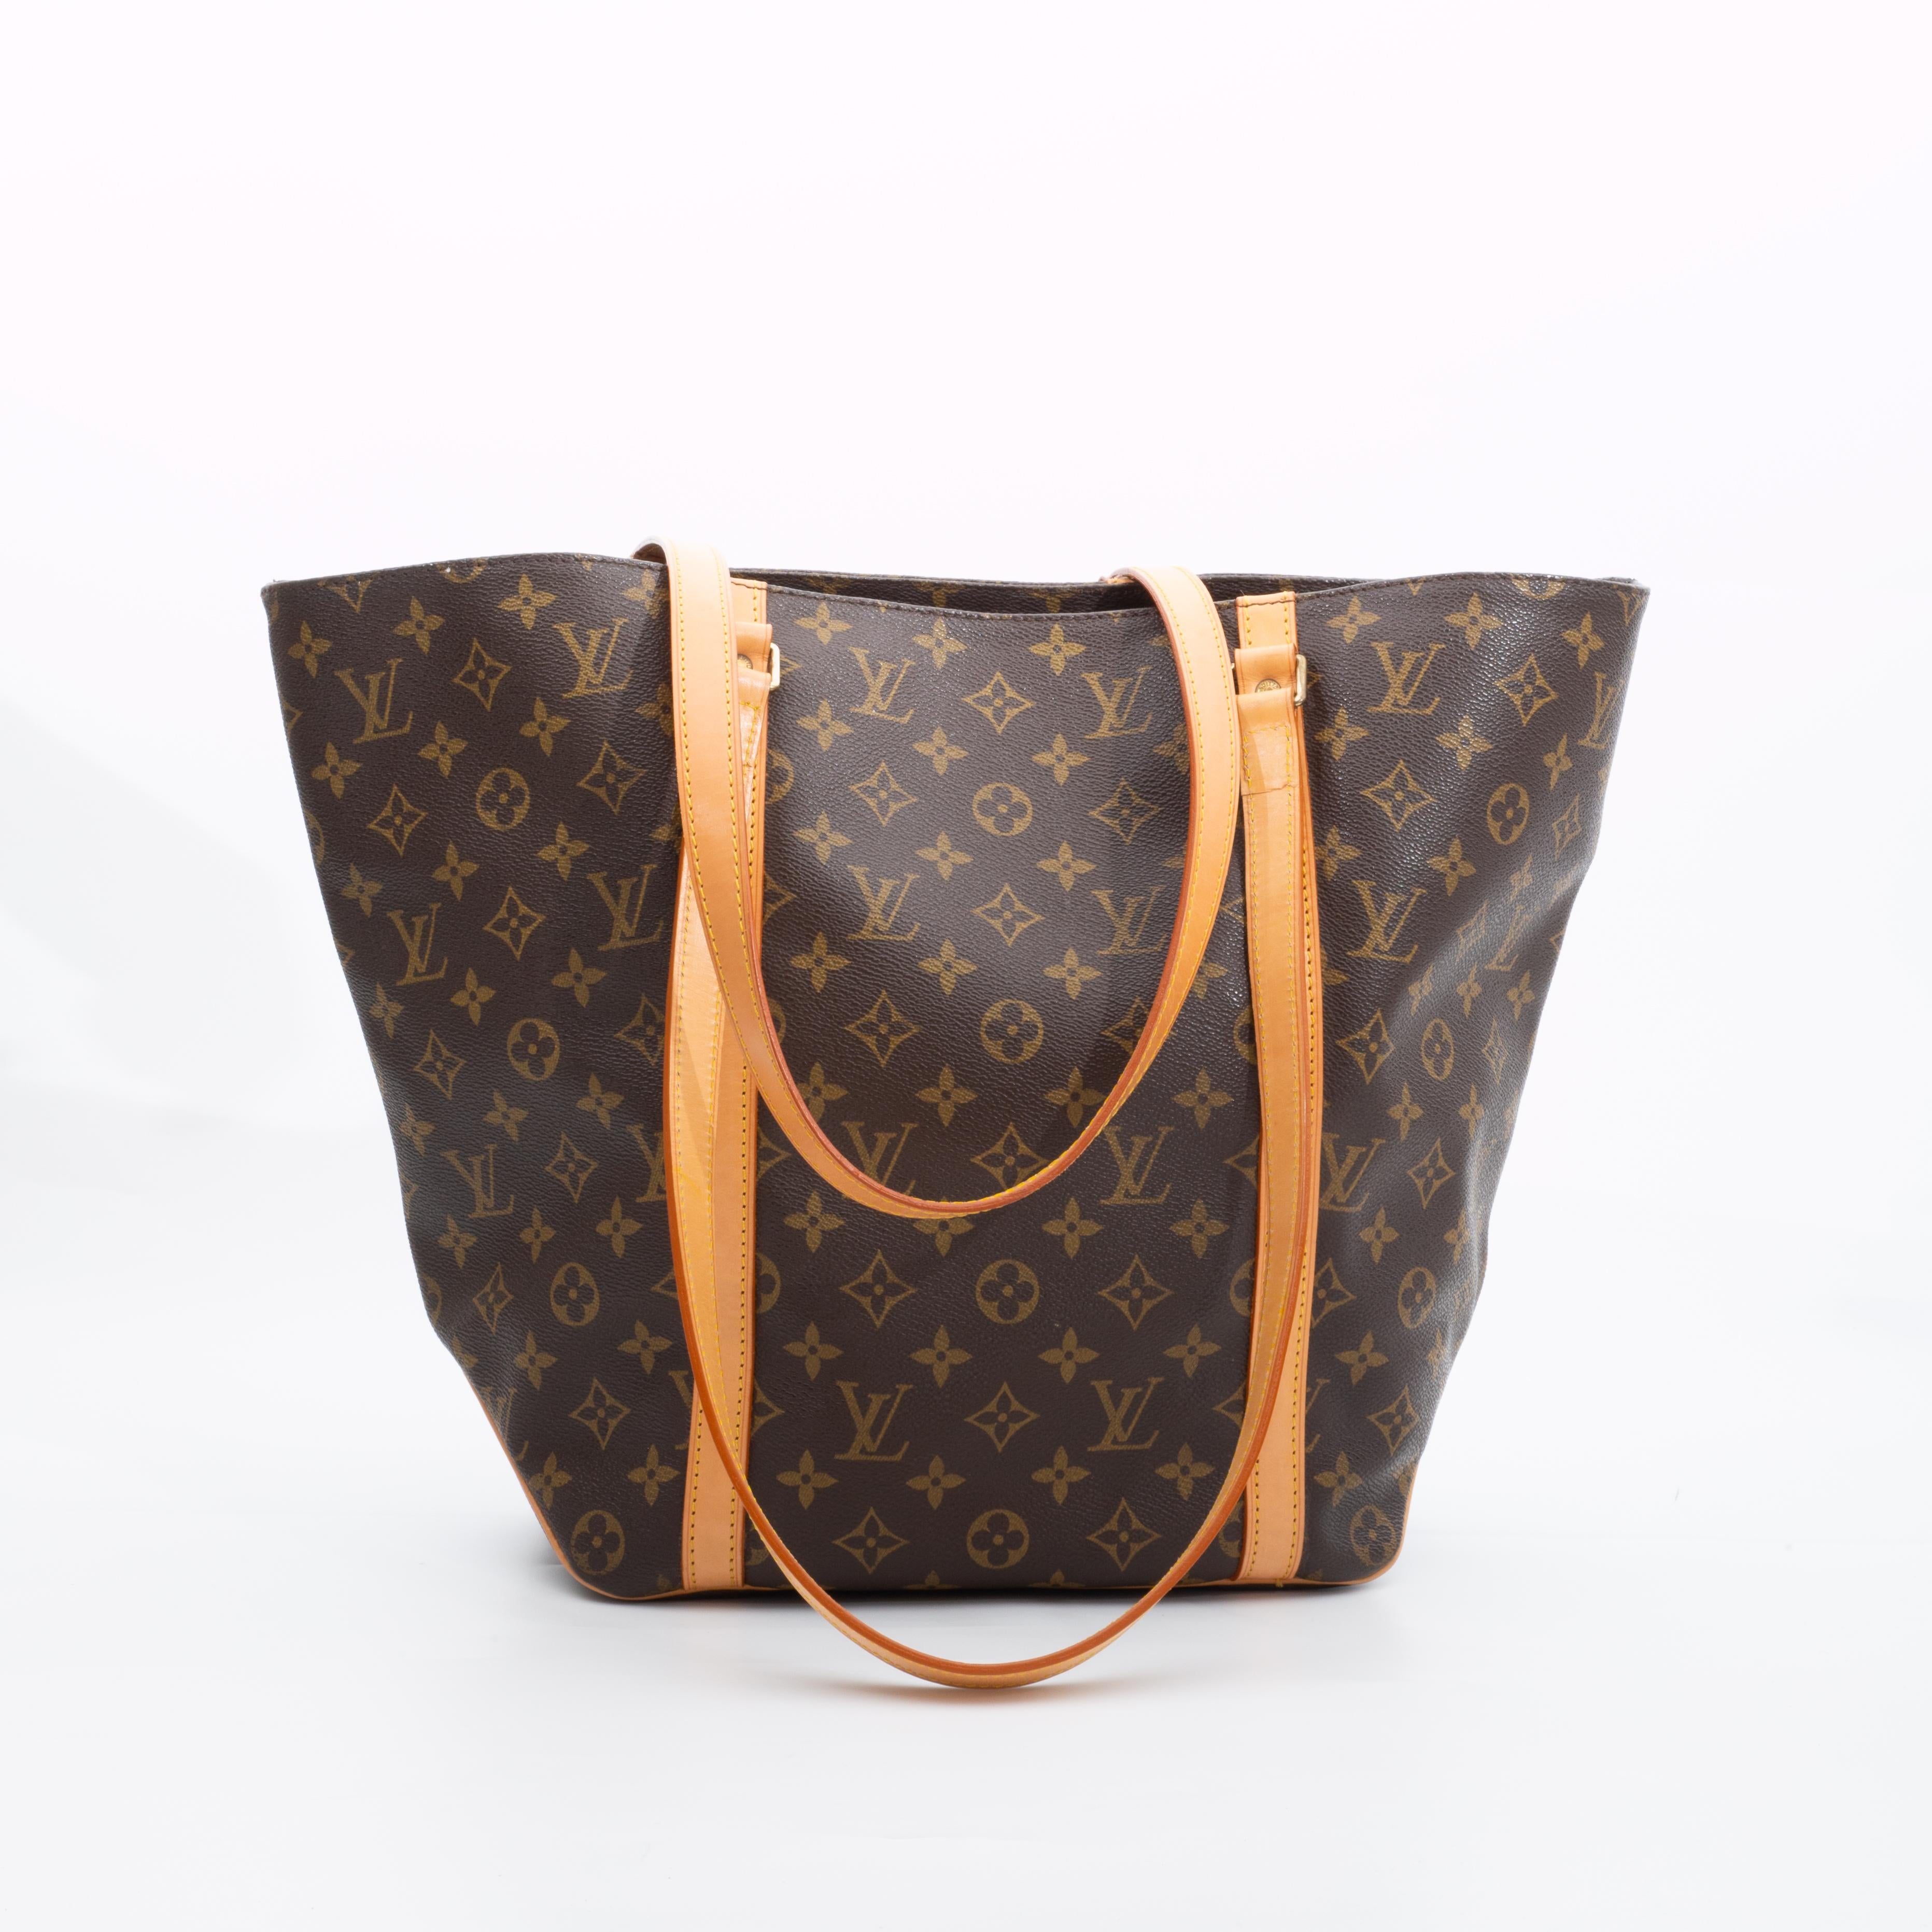 COLOR: Brown 
MATERIAL: Coated canvas
ITEM CODE: NI0937
MEASURES: H 13” x L 18” x D 6”
DROP: 12”
CONDITION: Very good - vachetta has been replaced by LV, minimal signs of wear, marks and stains to vachetta

Made in France